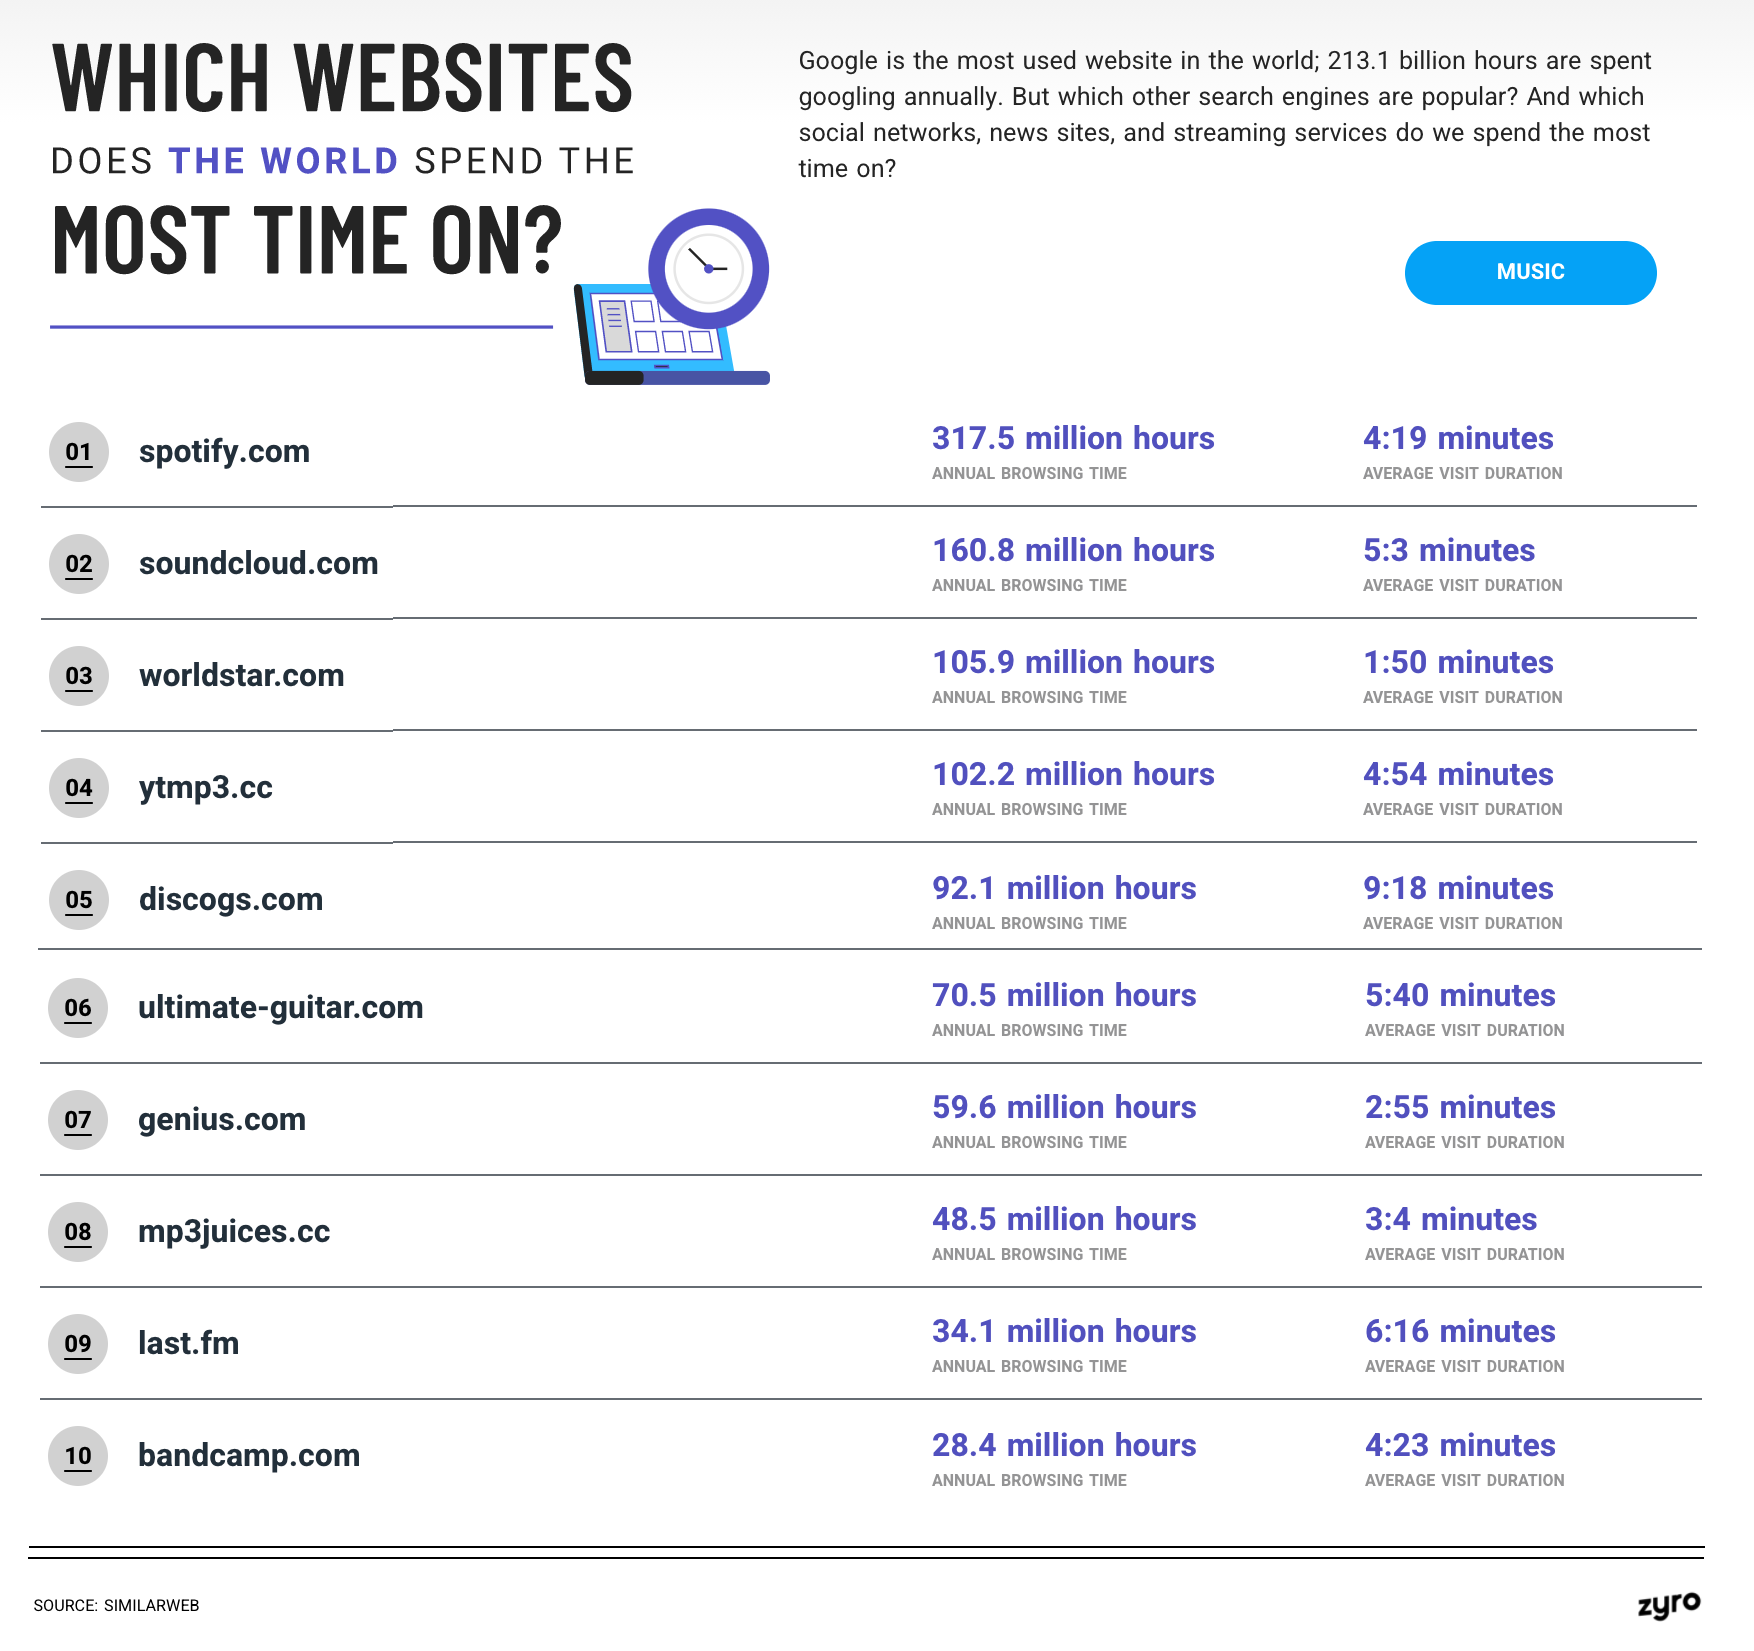 Which Music Websites Does the World Spend the Most Time On?